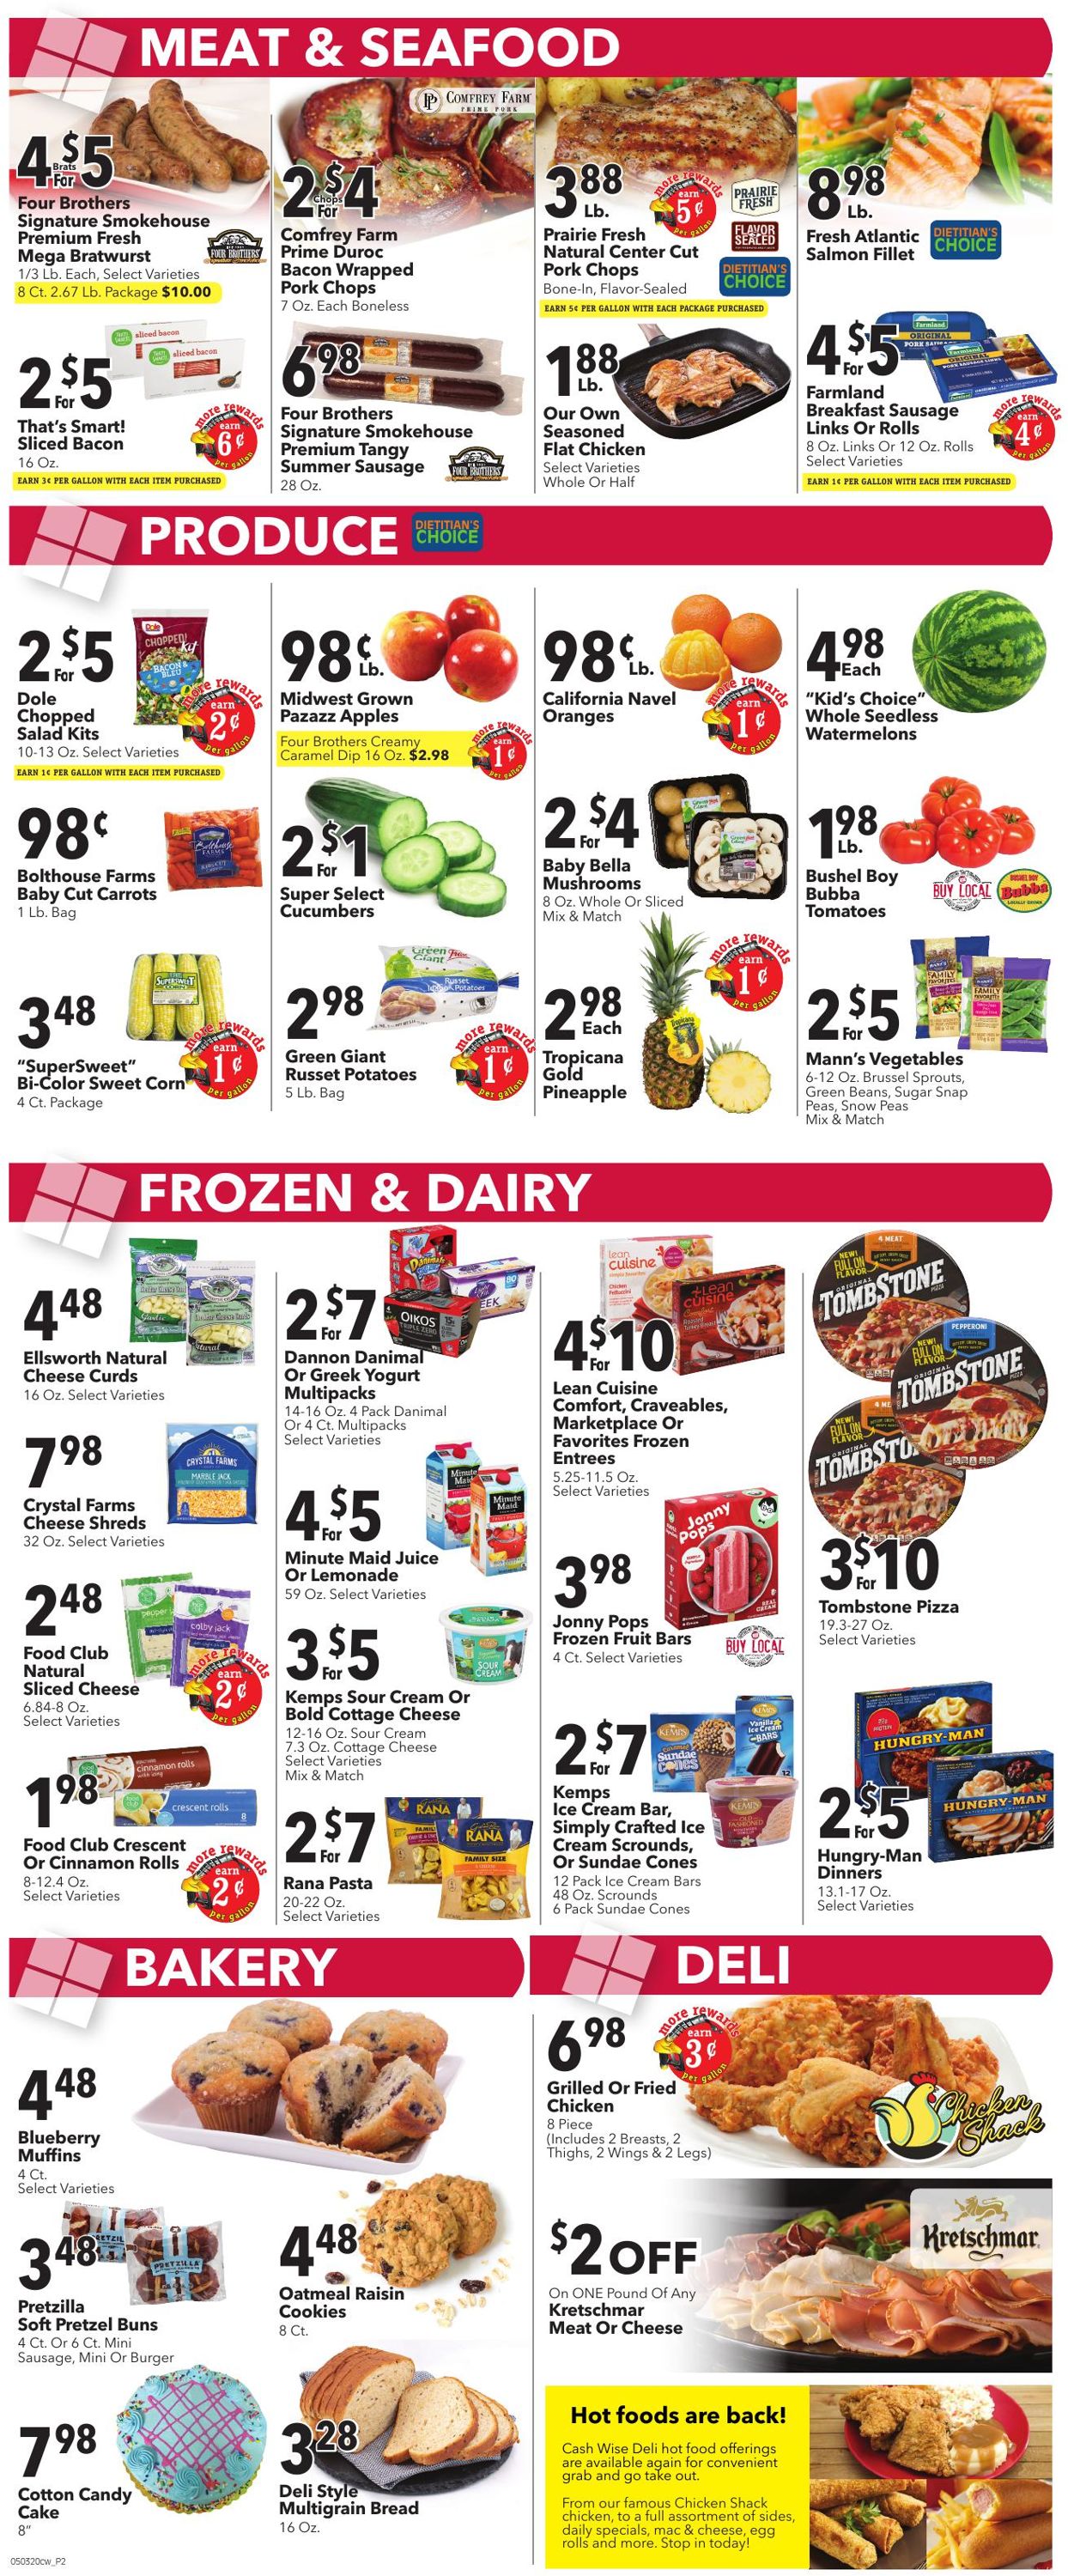 Cash Wise Weekly Ad Circular - valid 05/06-05/12/2020 (Page 2)